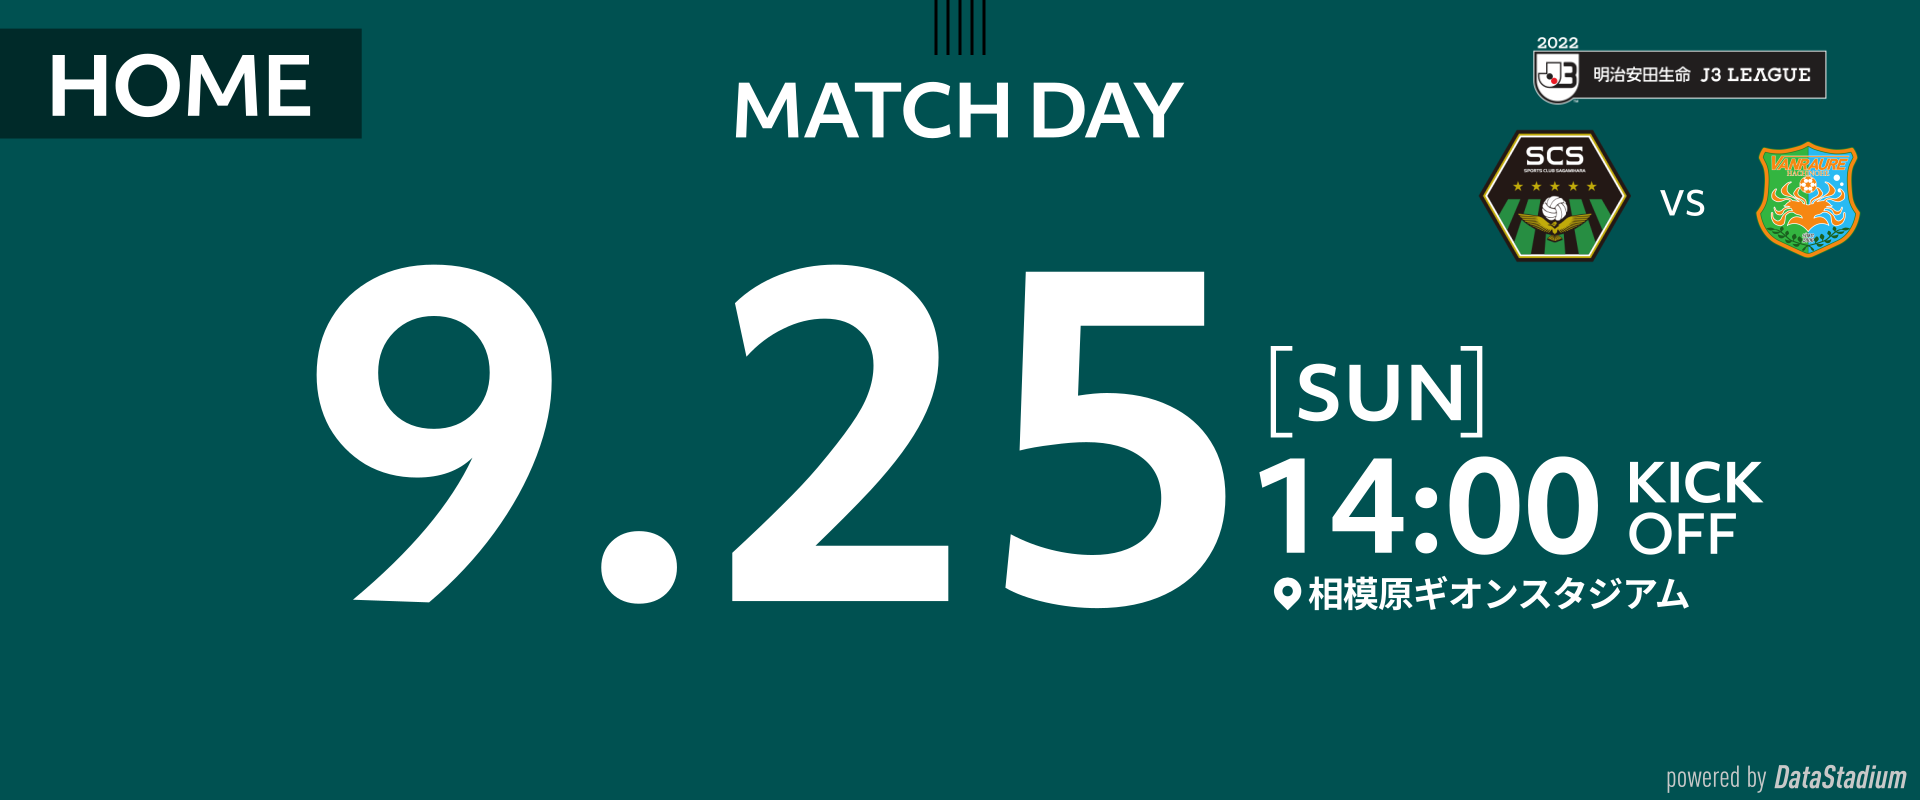 0925_matchday_1920_800.png